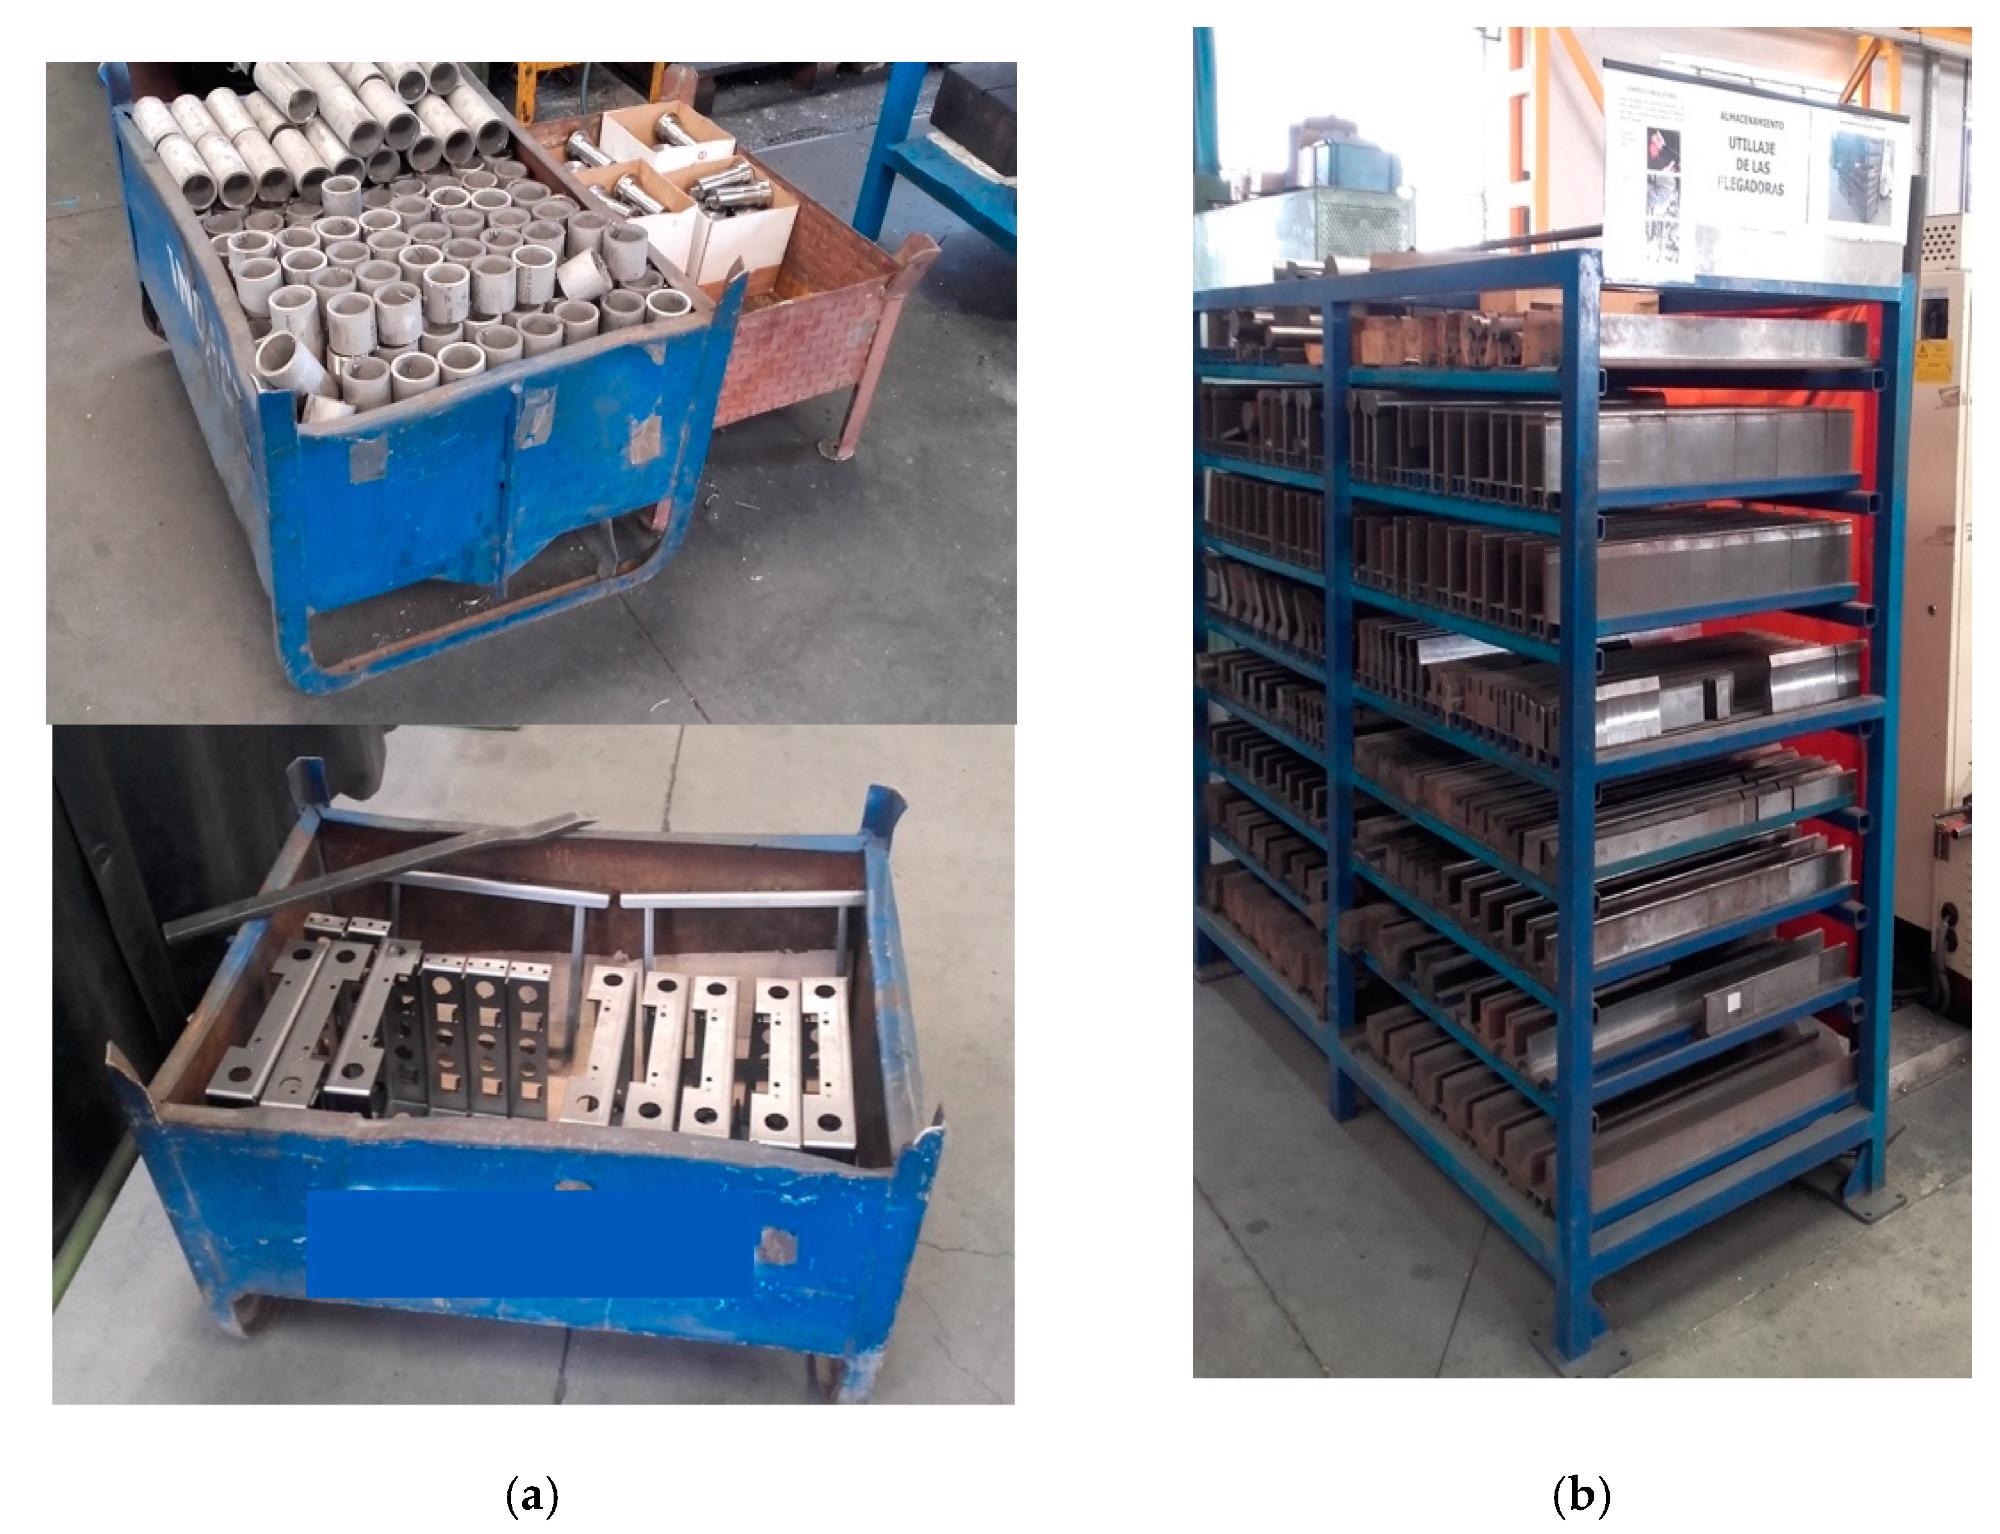 (a) Storage of products in containers, (b) Storage of press brake tools with 5S visual control signage.